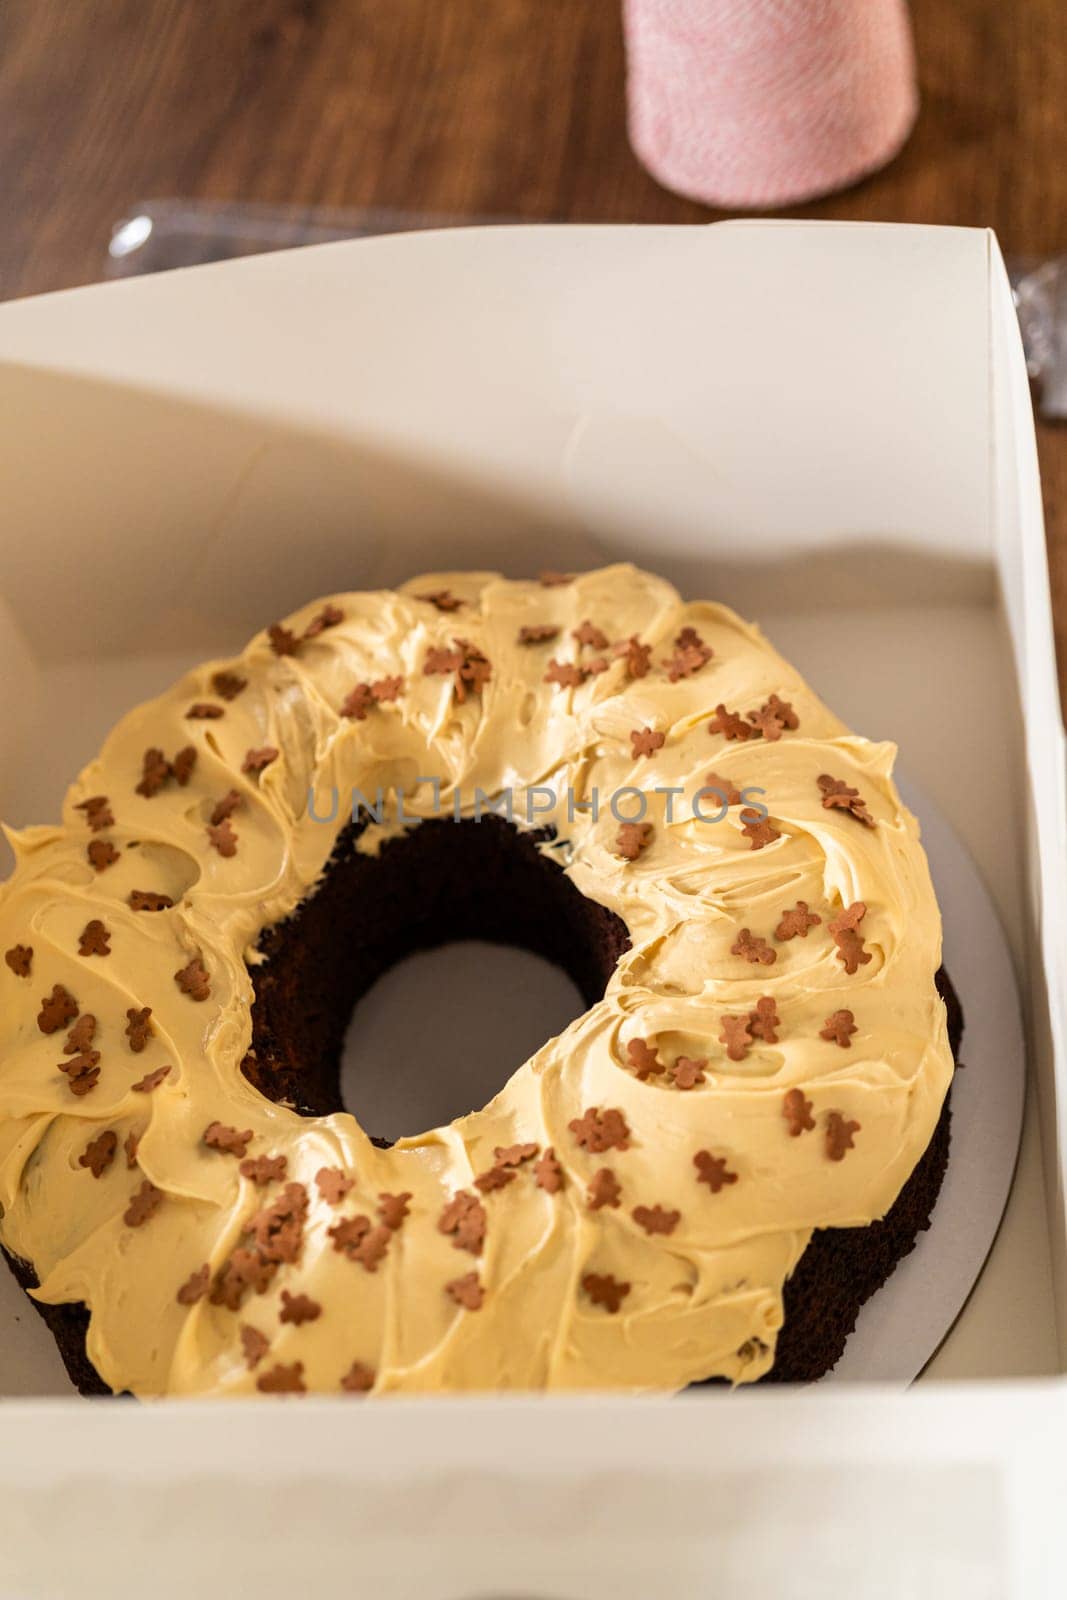 Carefully placing the gingerbread bundt cake, adorned with salted caramel frosting and gingerbread sprinkles, into a white paper bundt cake box with a clear window for gifting.